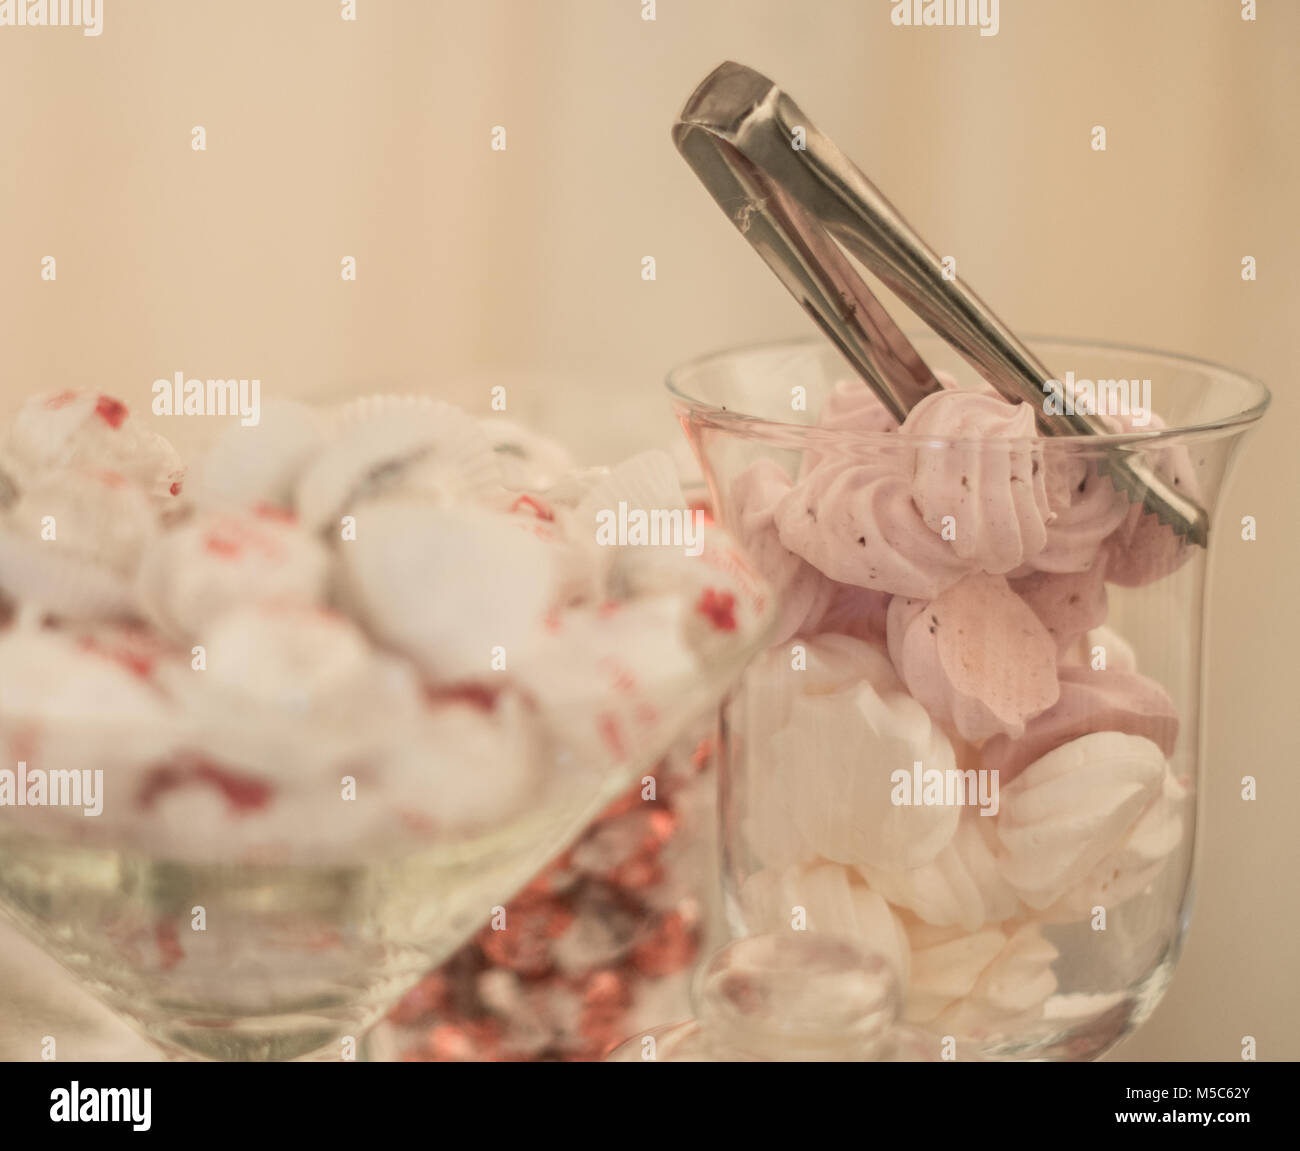 Sweets in a bowl with a scoop Stock Photo